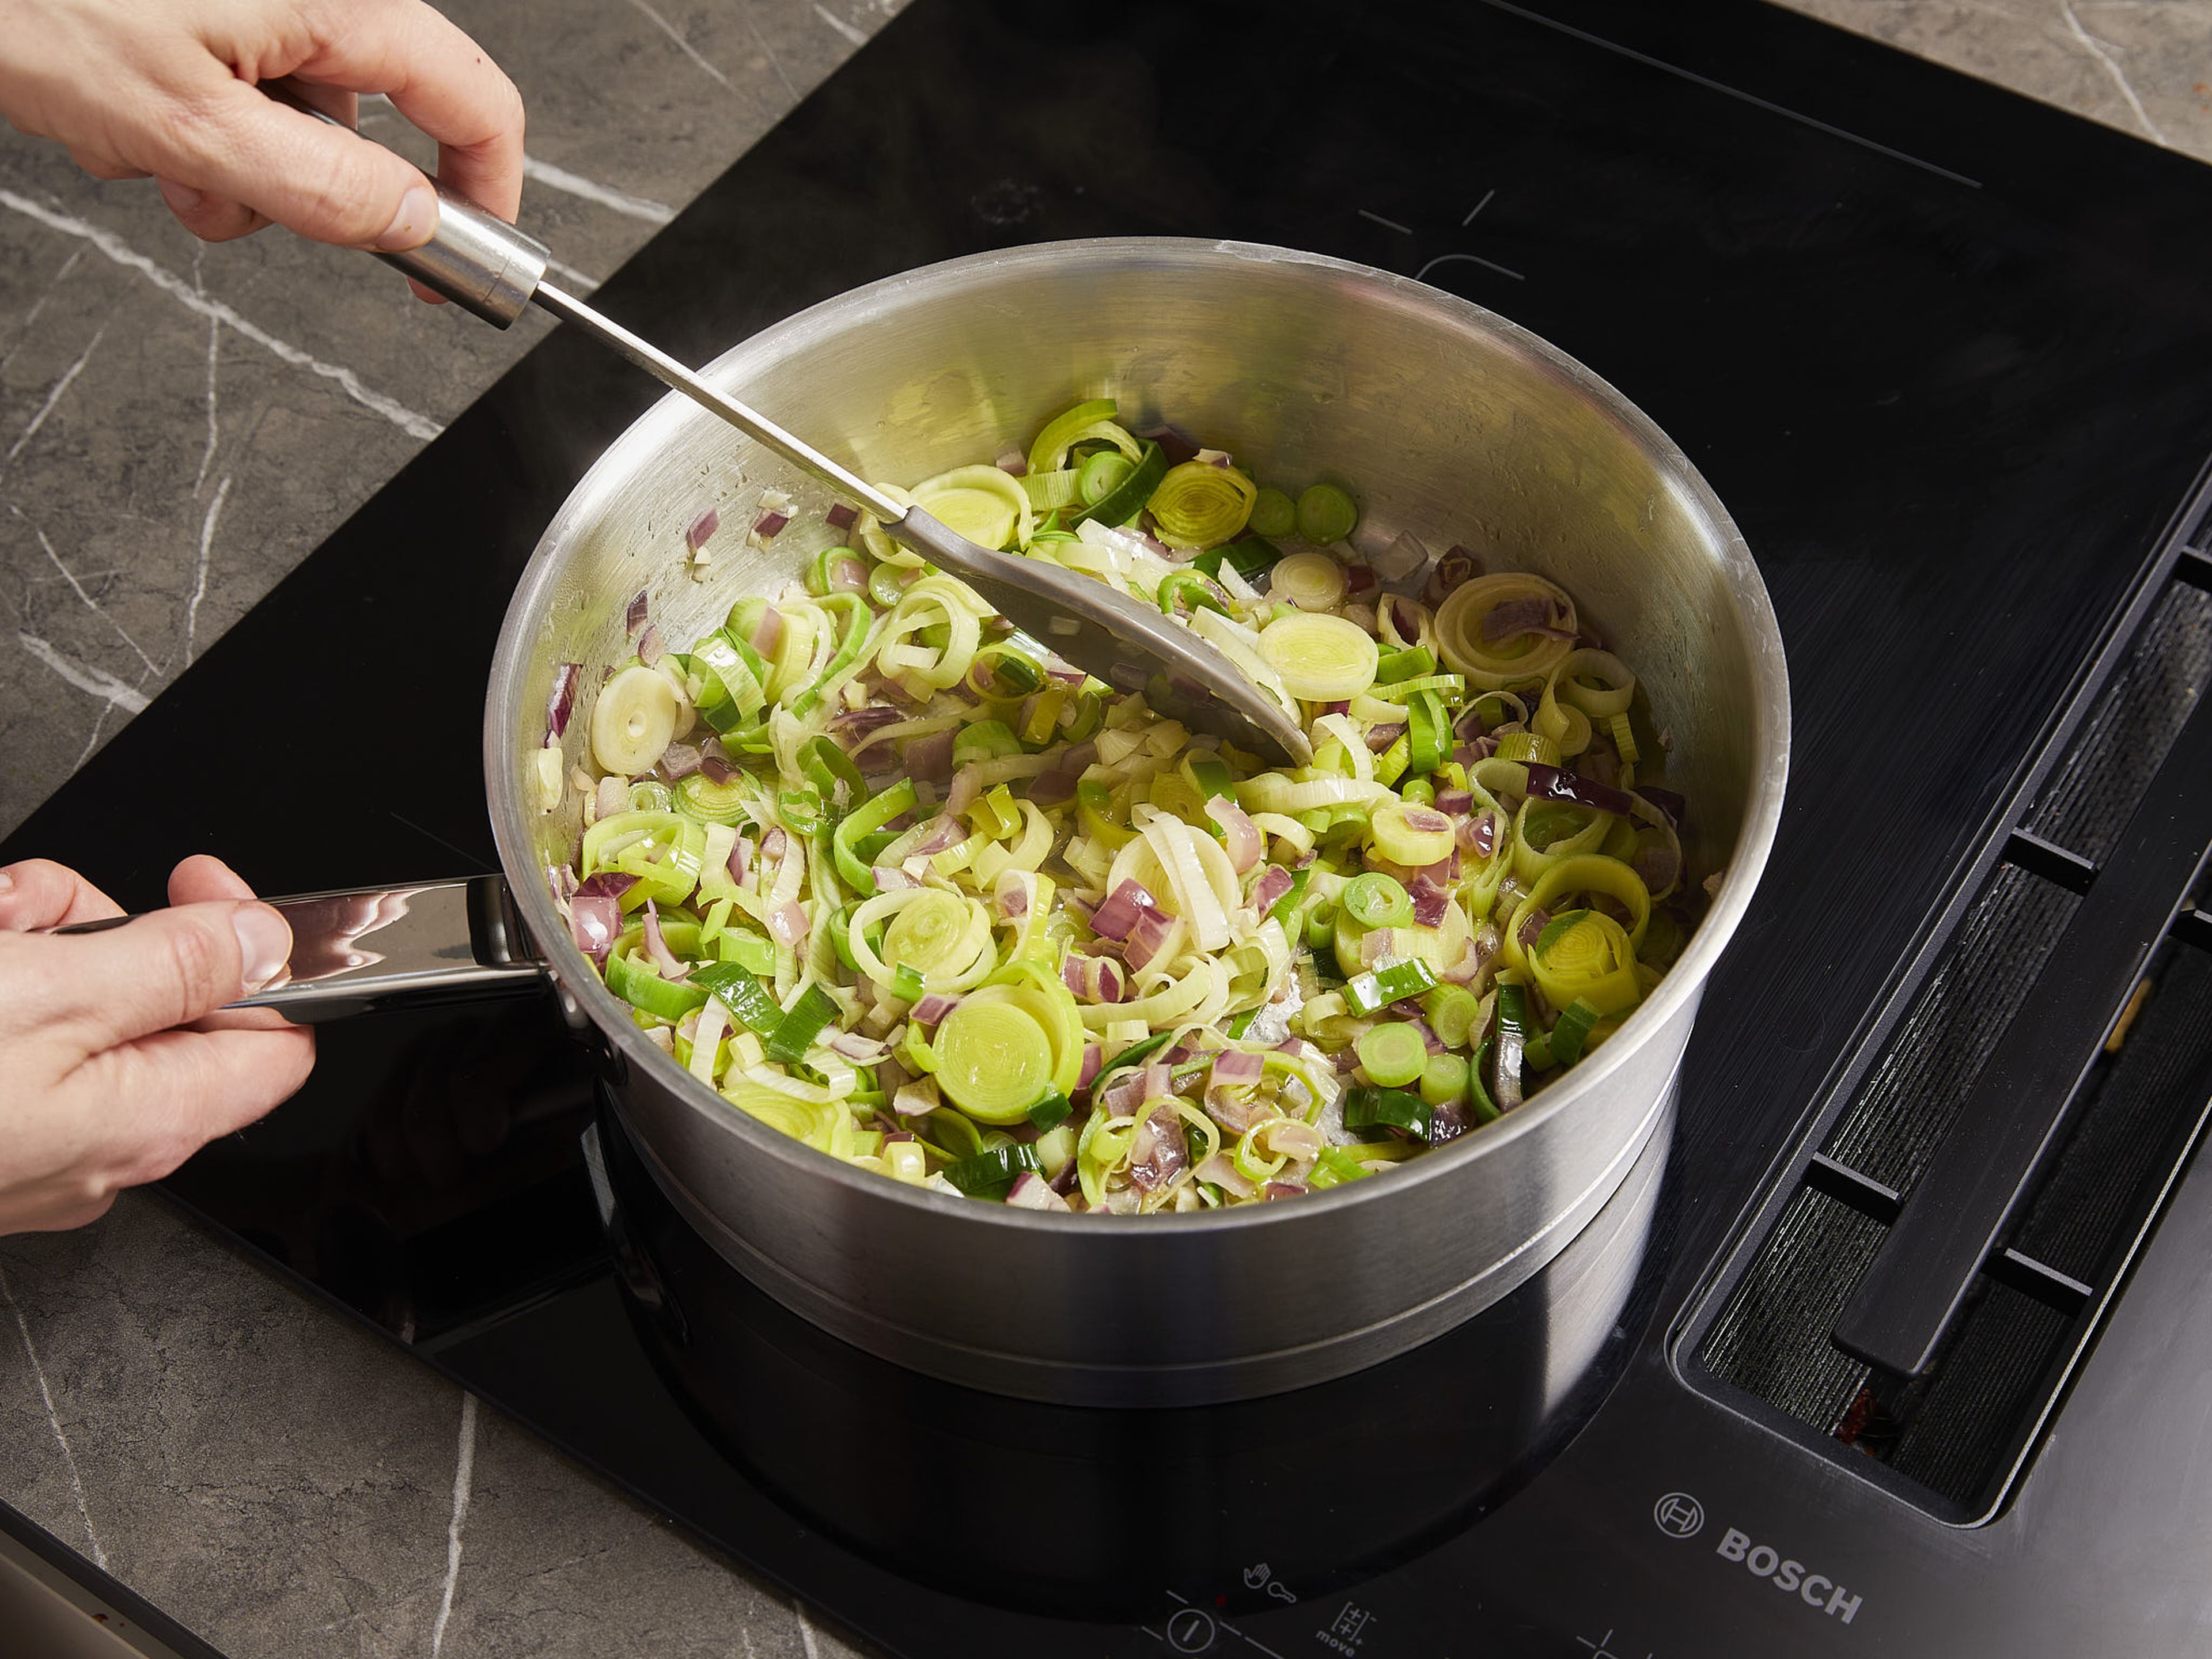 Preheat oven to 180°C/350ºF.  Cut scallions into fine rings. Separate the whites from the greens and put the latter aside for garnishing. Cut leek into fine rings. Dice onion and mince garlic. Rinse rice and drain. Heat butter in a deep frying pan. Fry onion, garlic, scallion whites, and leek over medium-high heat for approx. 3–5 min. until translucent. Season with salt. Then add flour and curry powder, and fry for approx. 1 more min.